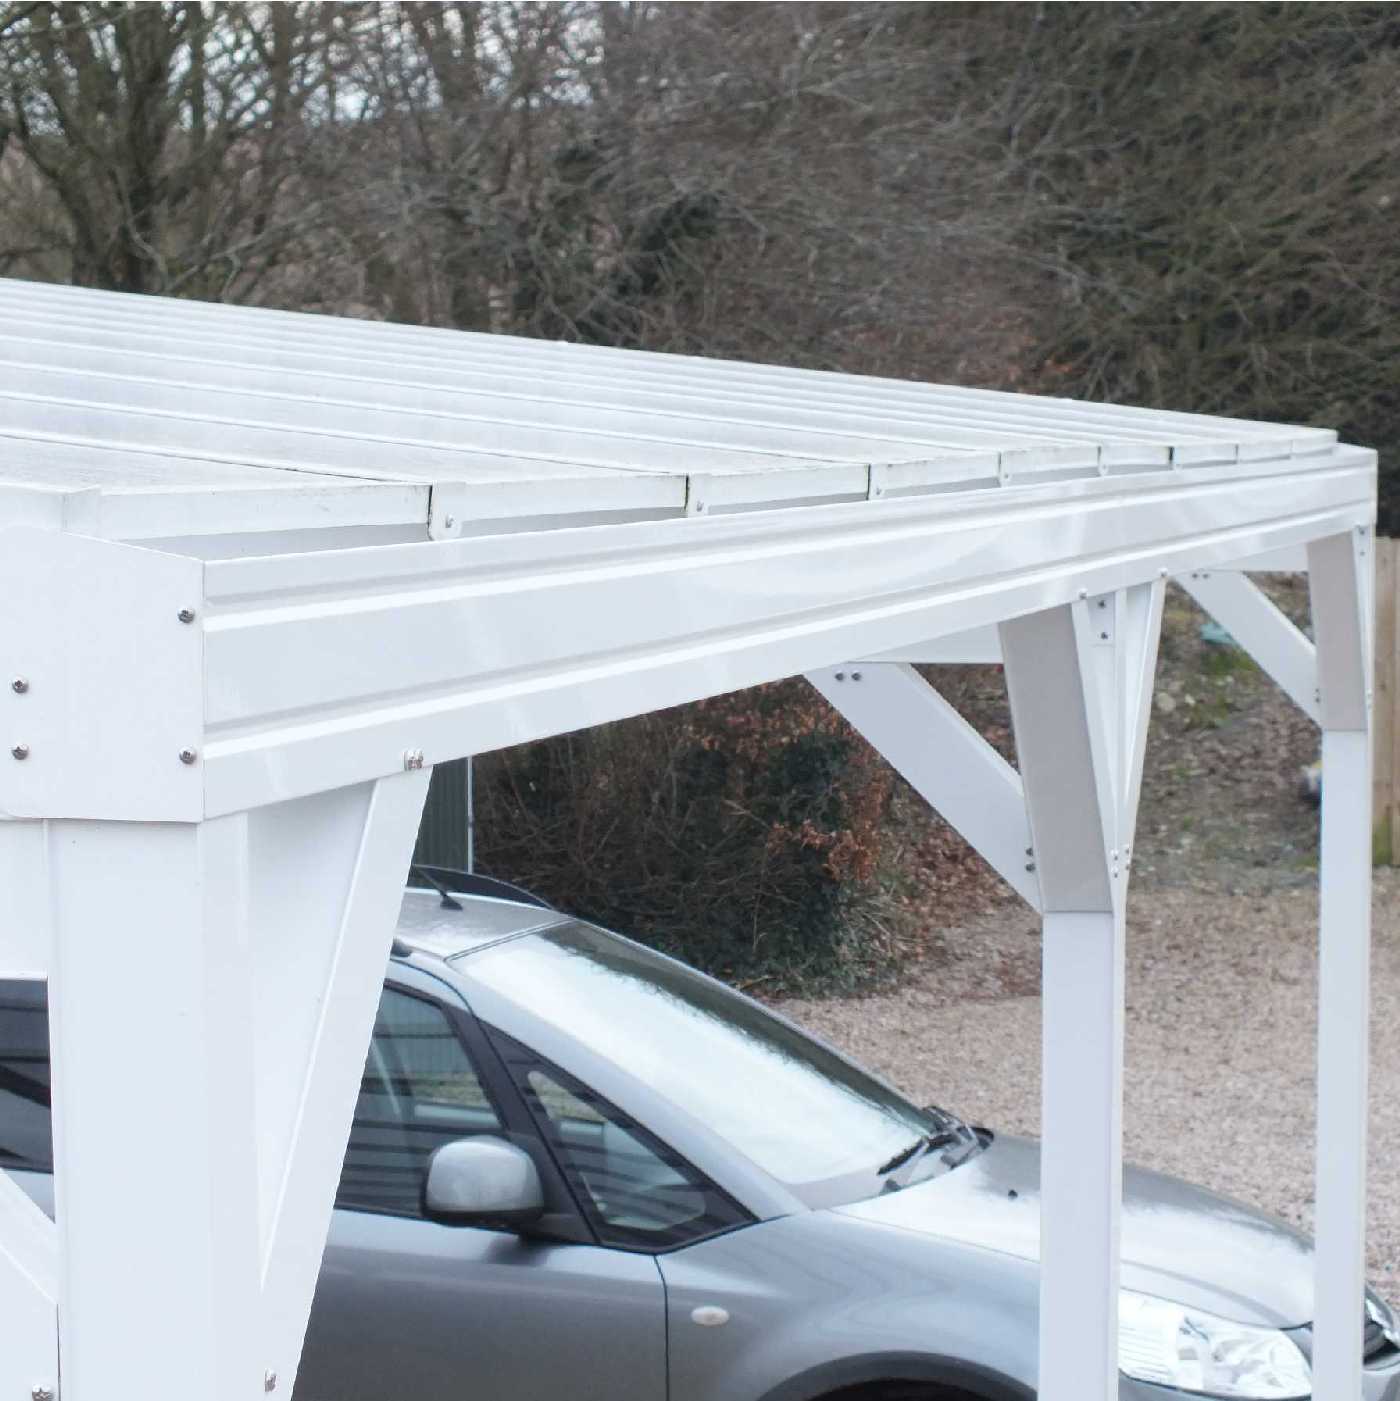 Omega Smart Free-Standing, White MonoPitch Roof Canopy with 6mm Glass Clear Plate Polycarbonate Glazing - 7.0m (W) x 3.5m (P), (8) Supporting Posts from Omega Build